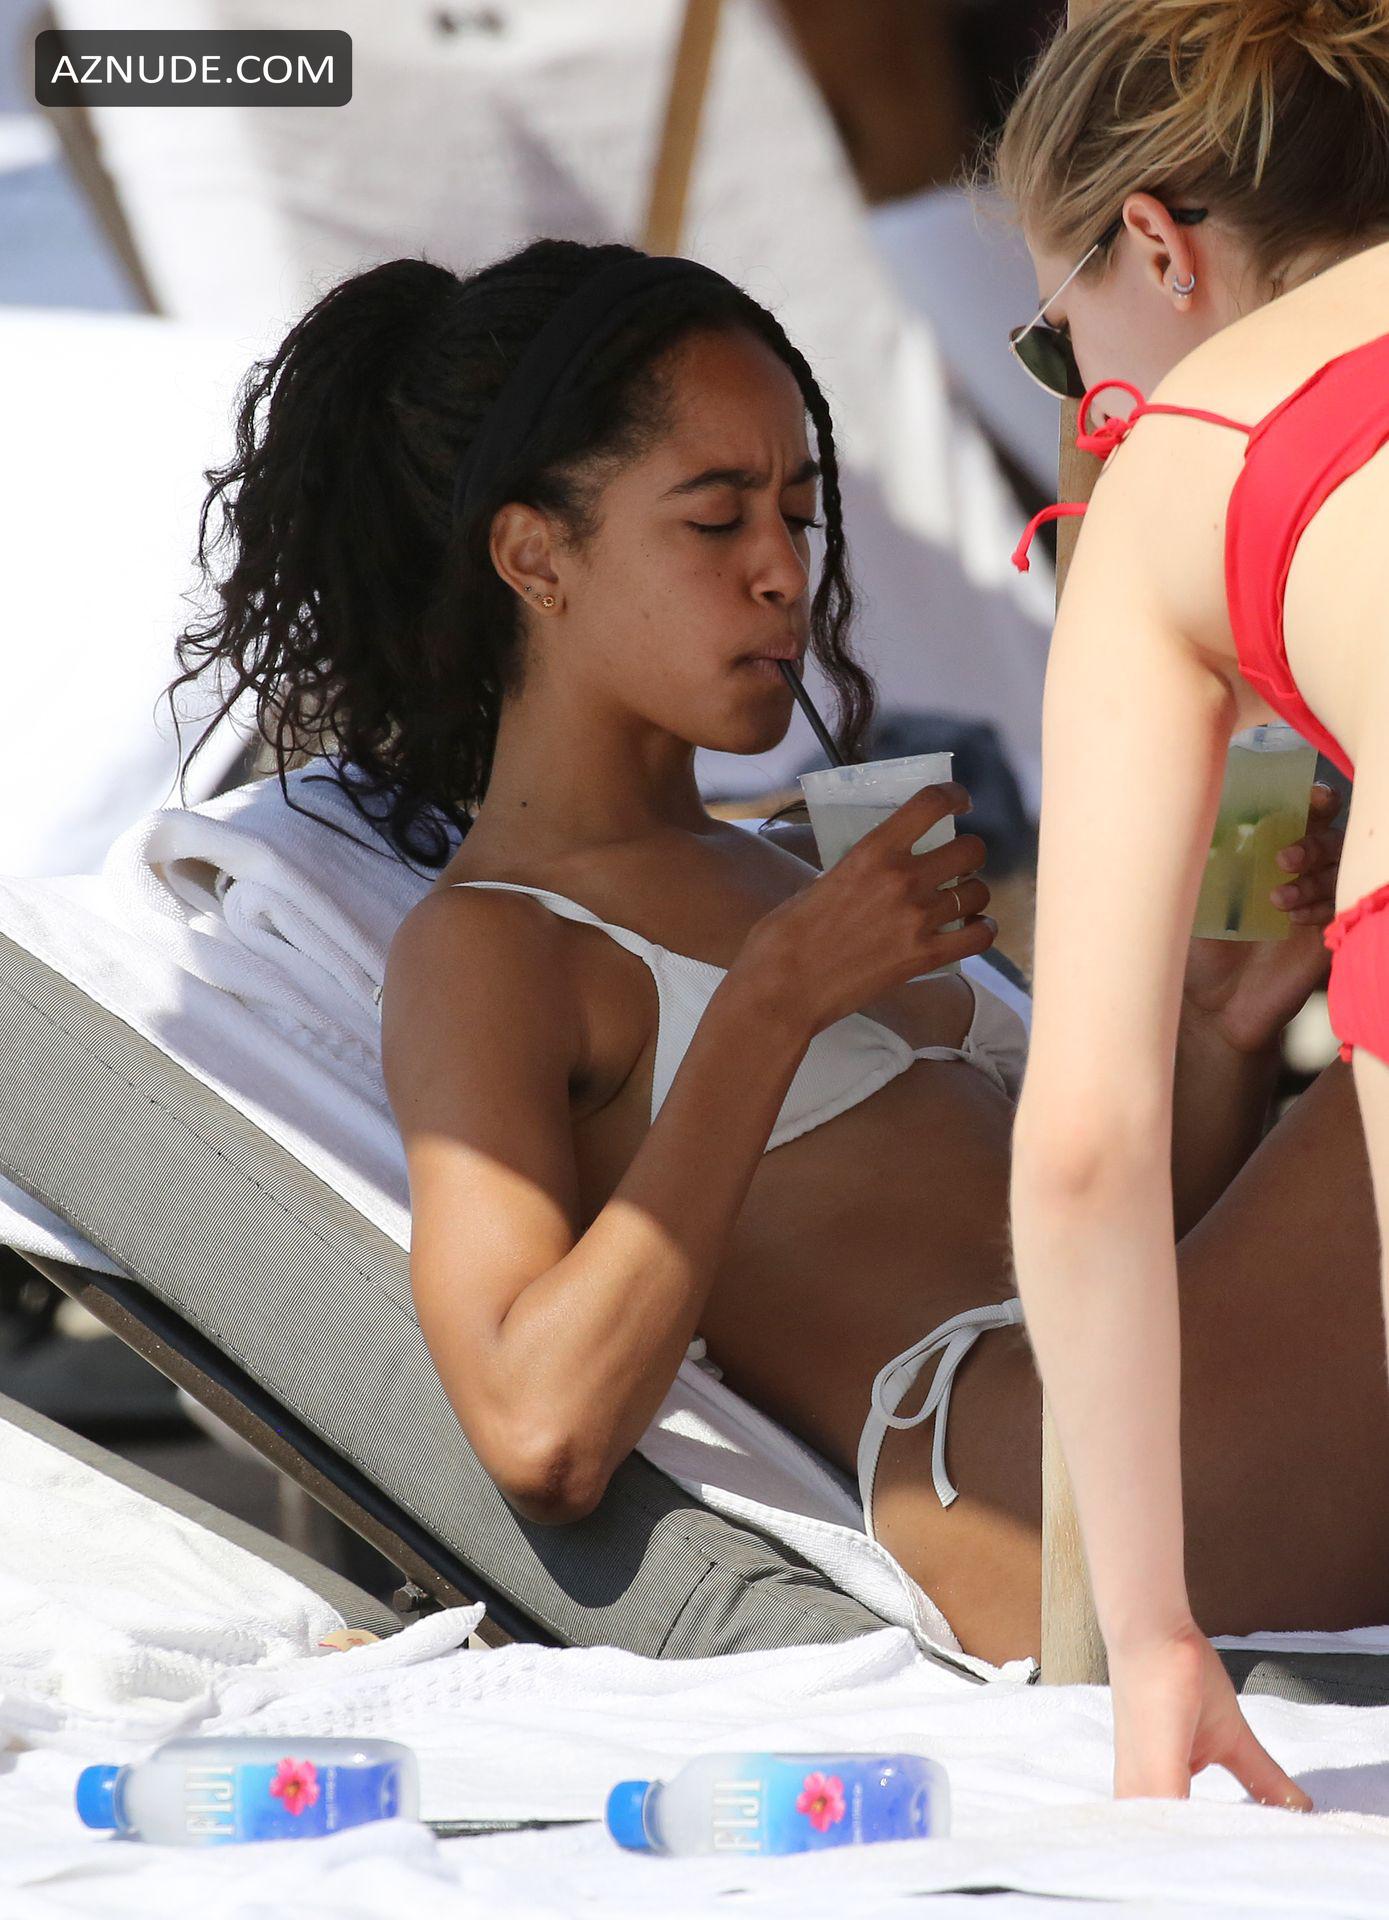 Malia Obama Sexy At The Beach With Her Friends 16 02 2019